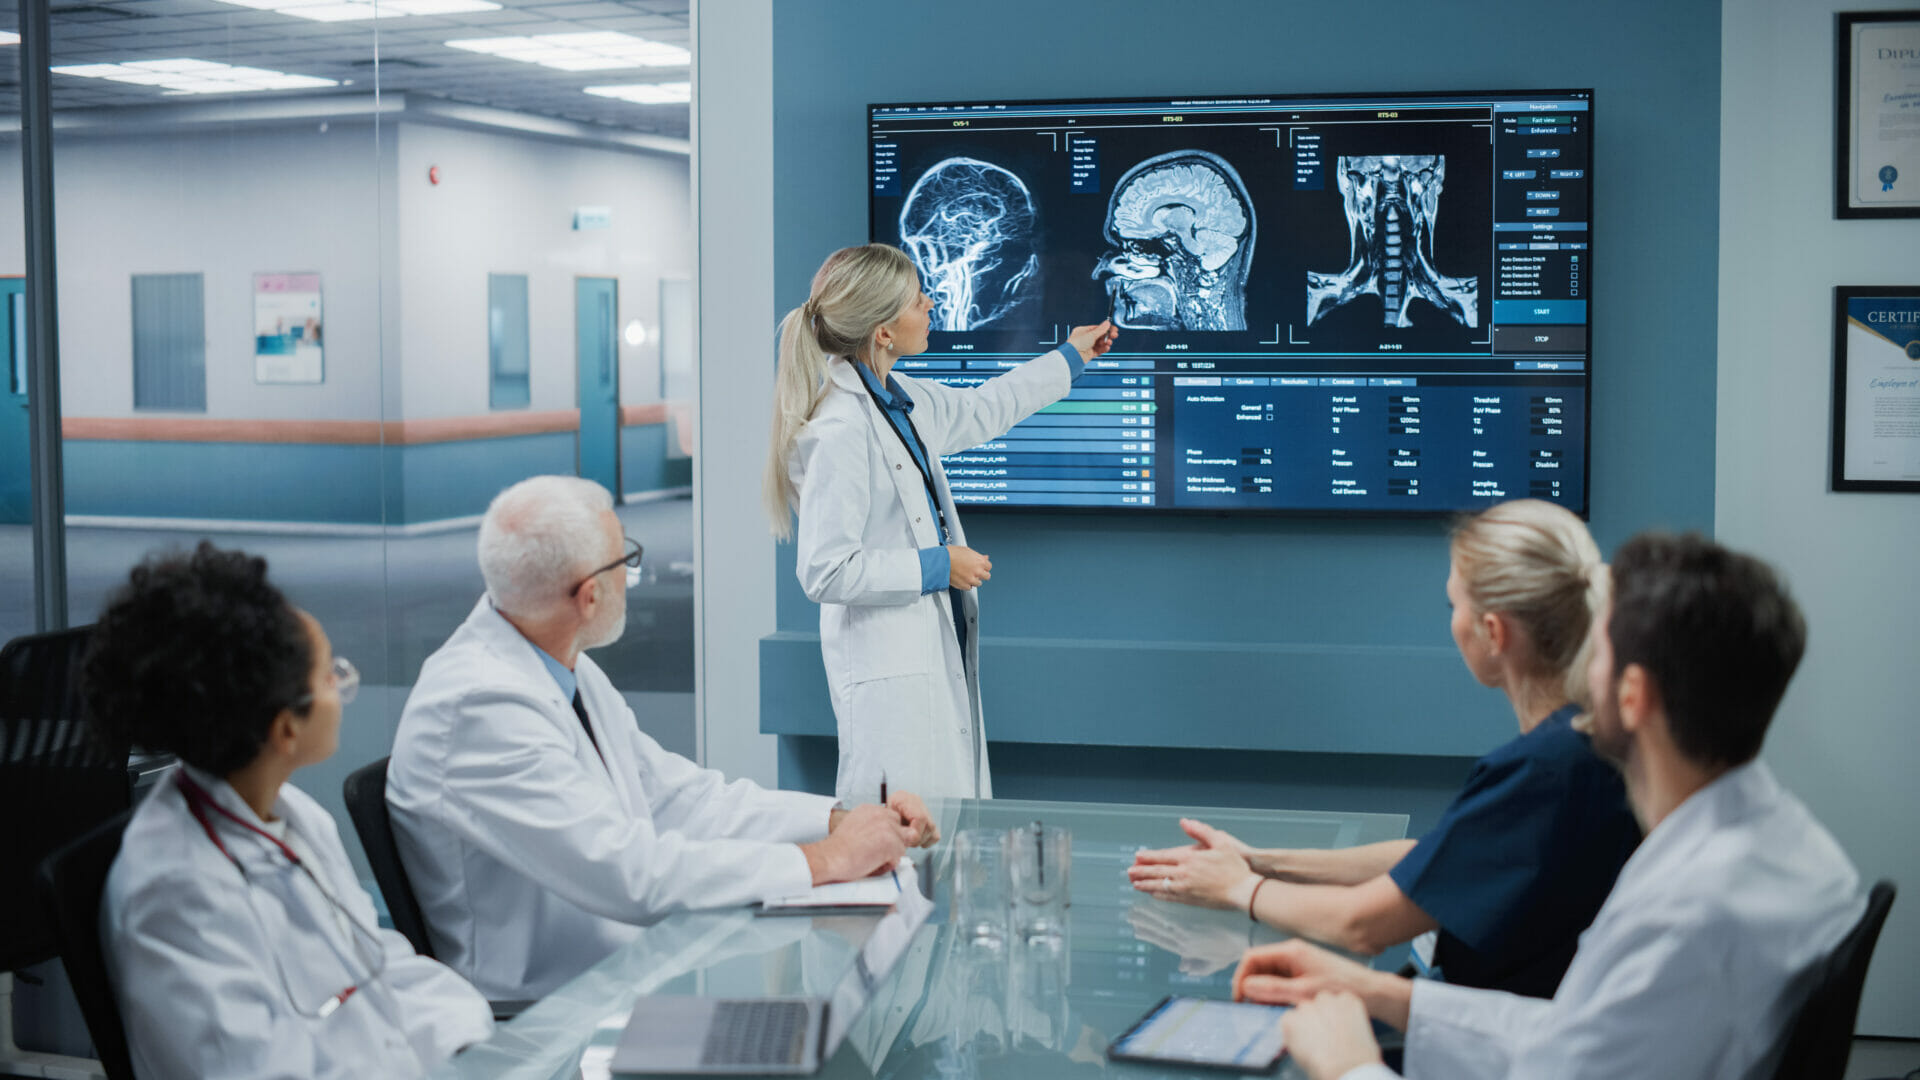 Digital Signage For Healthcare: Tips and Best Practices